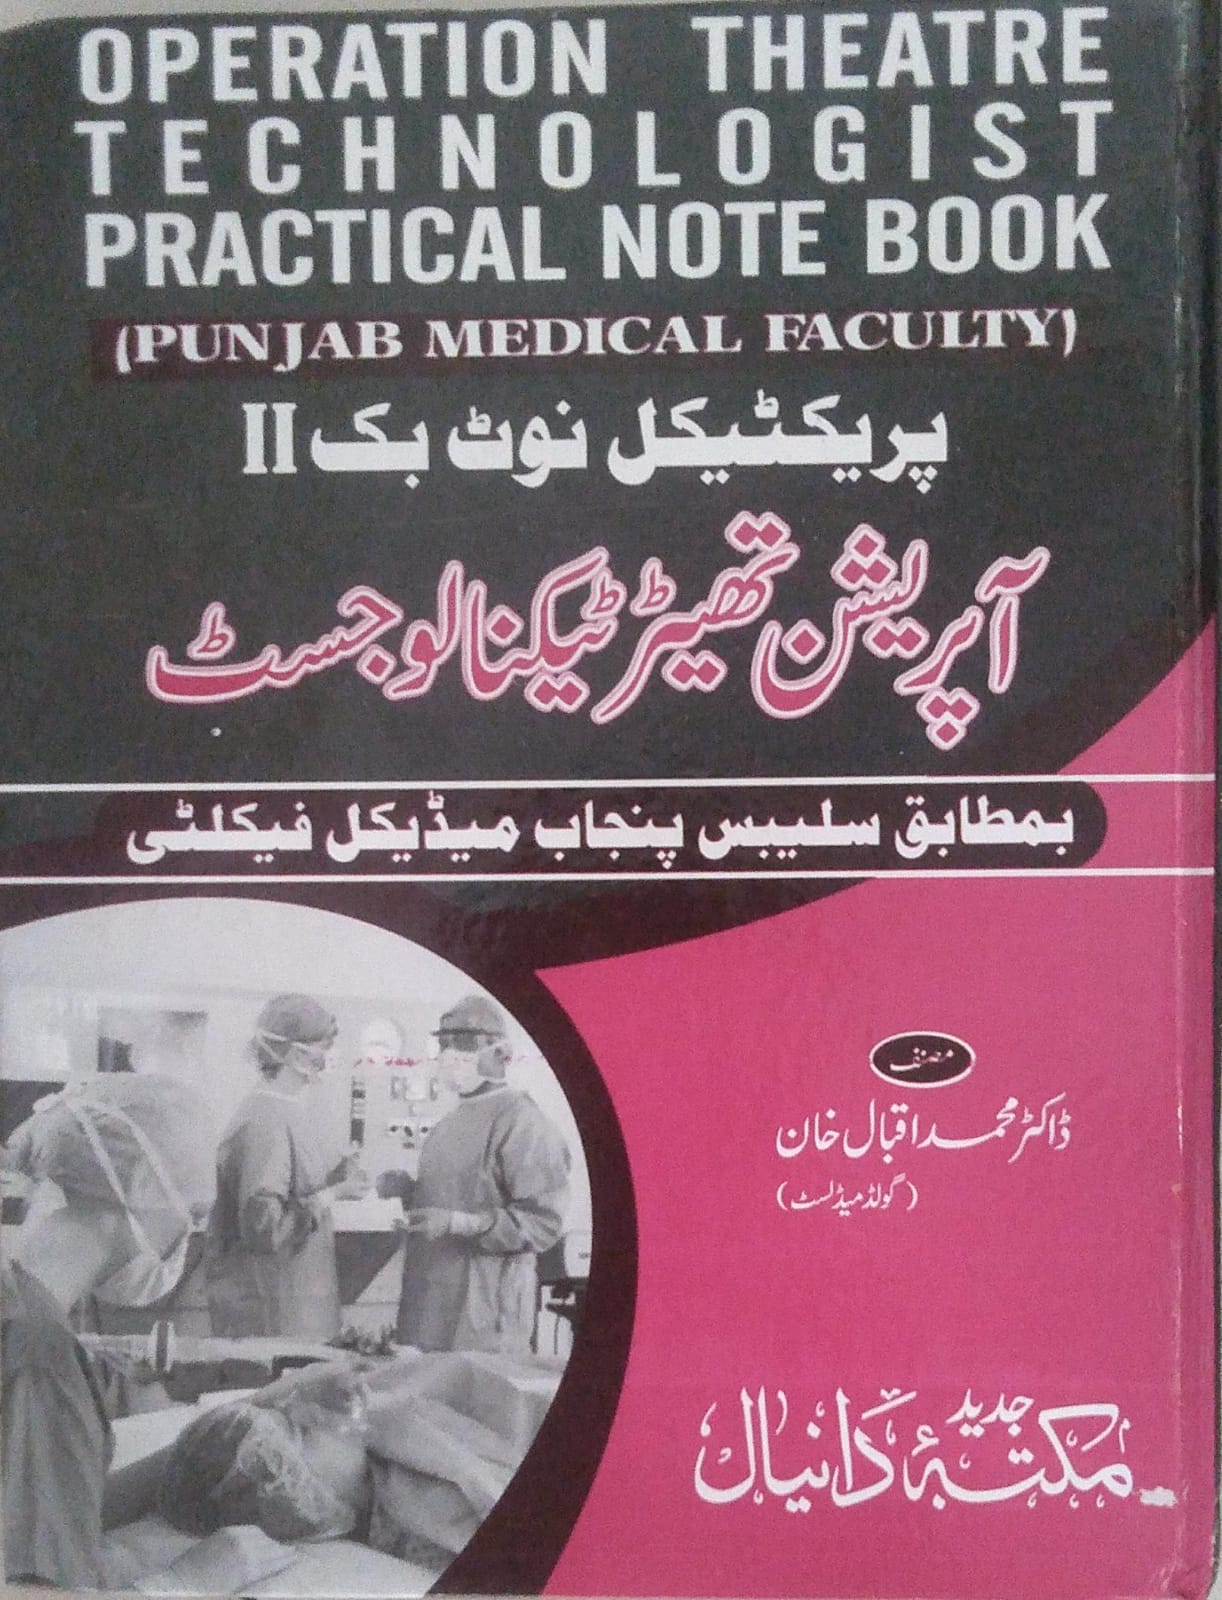 OPERATION THEATRE TECHNOLOGIST PRACTICAL NOTE BOOK - II